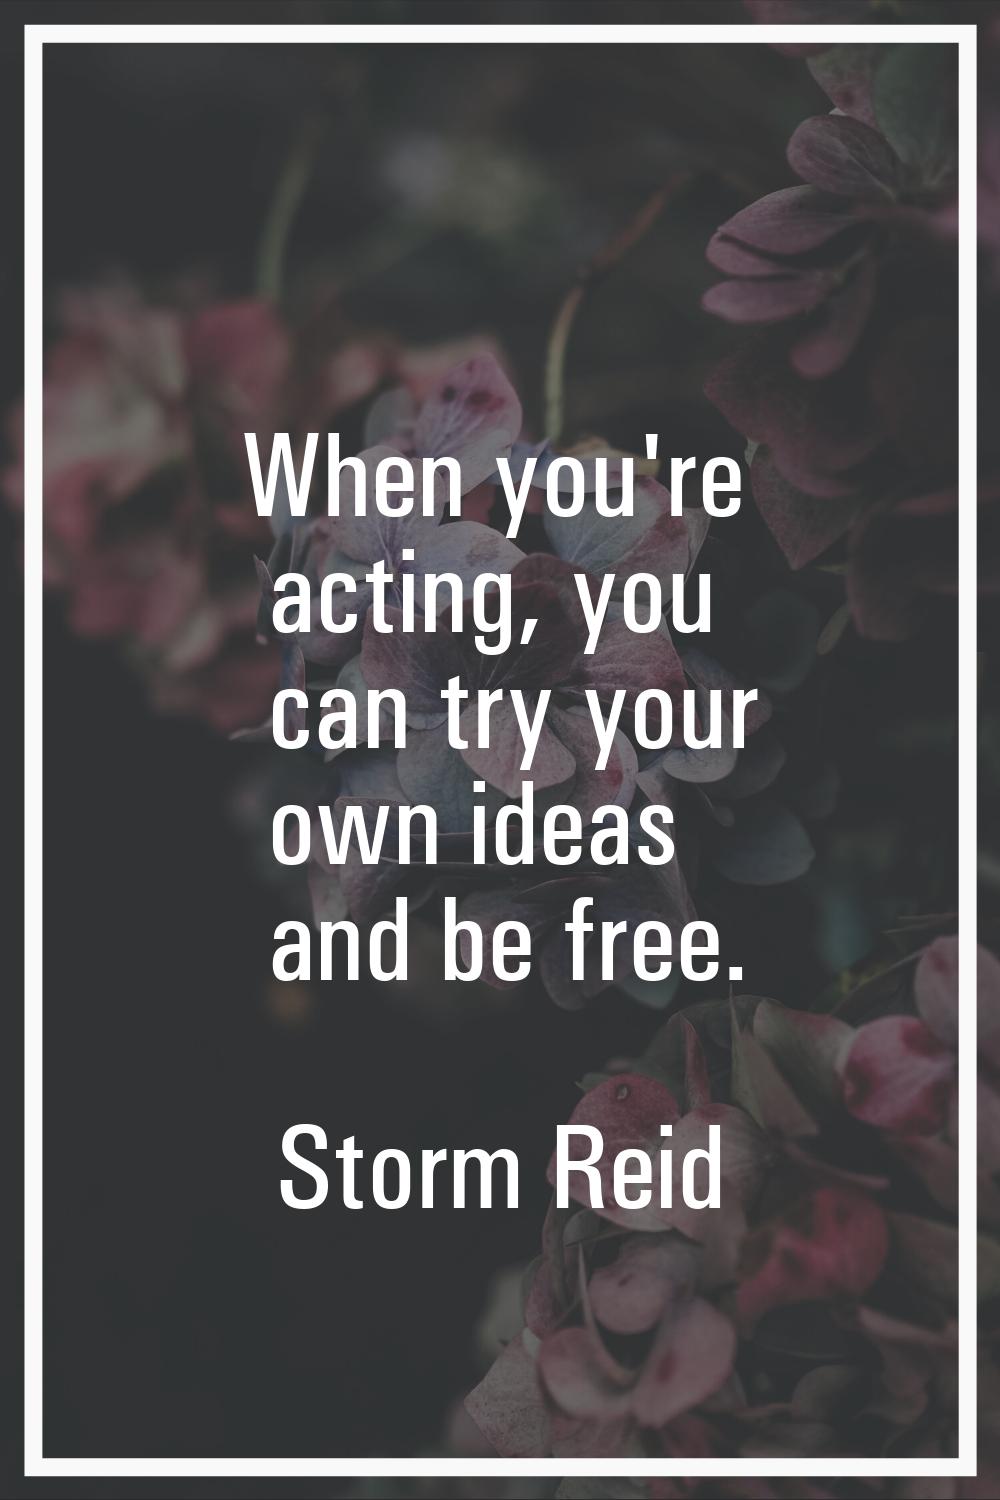 When you're acting, you can try your own ideas and be free.